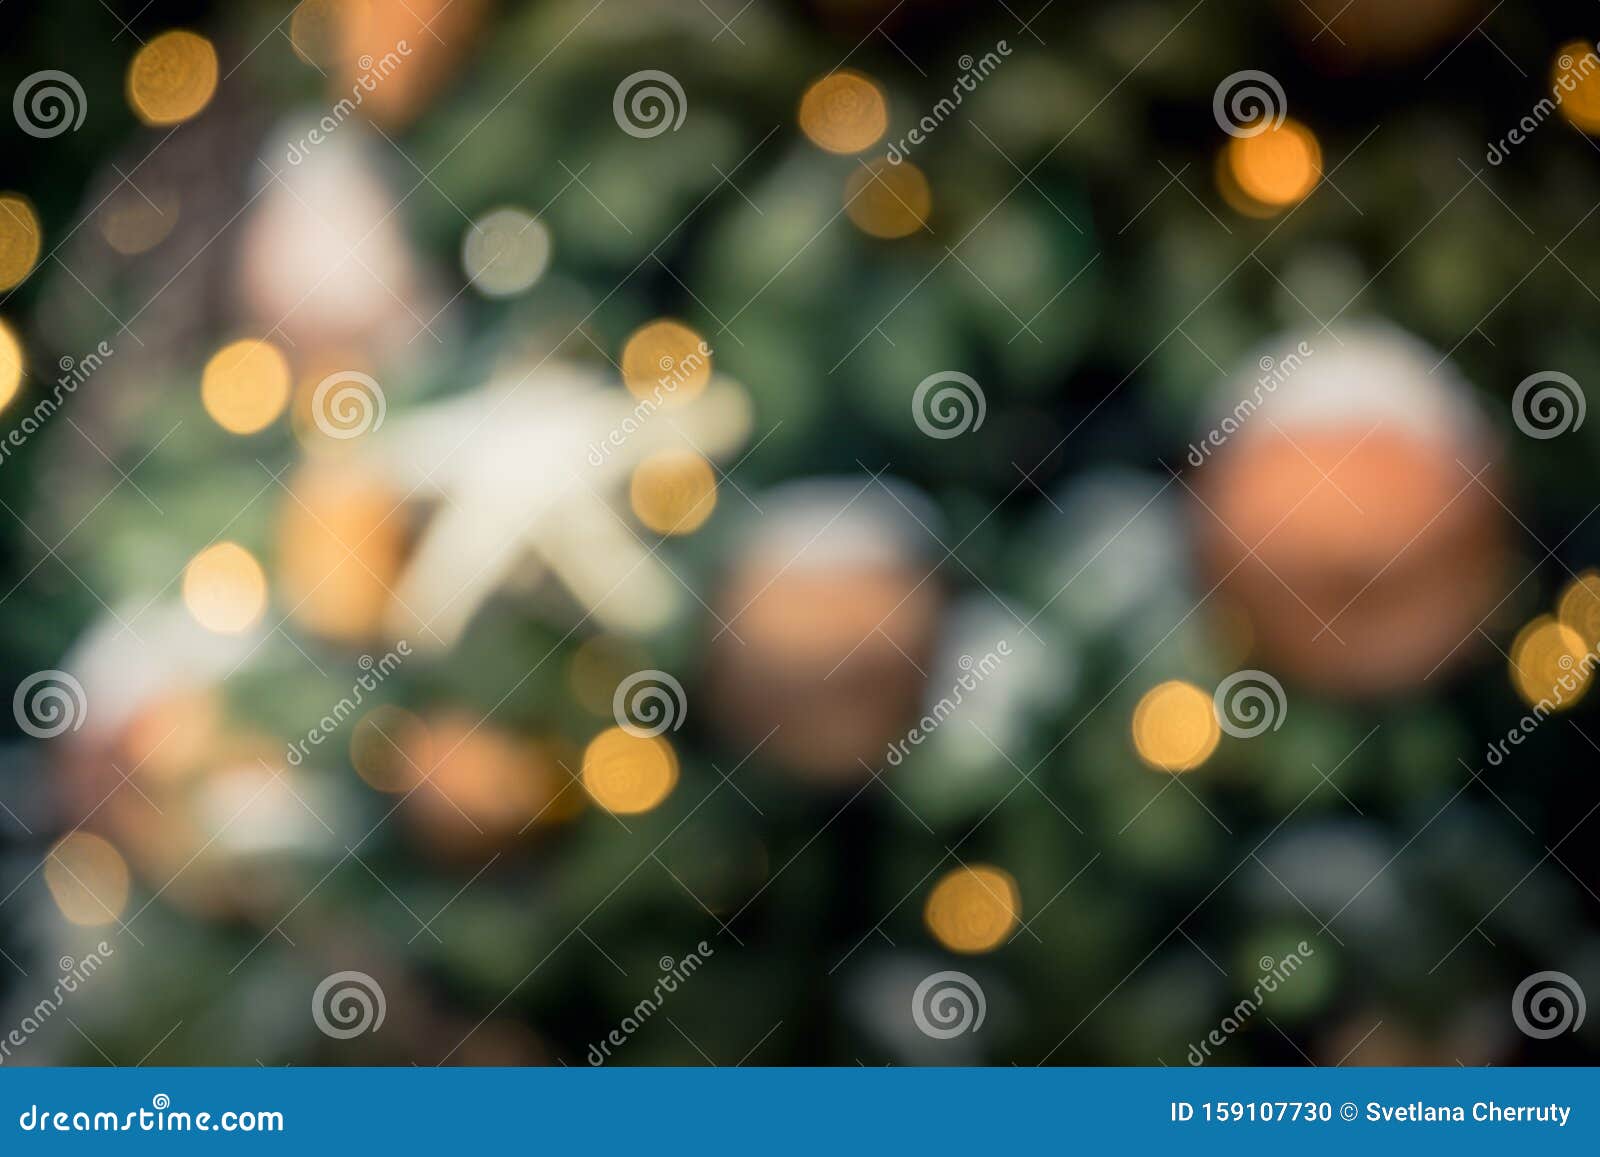 Blurred Christmas Tree with Golden Garland and Red Balls. Abstract ...